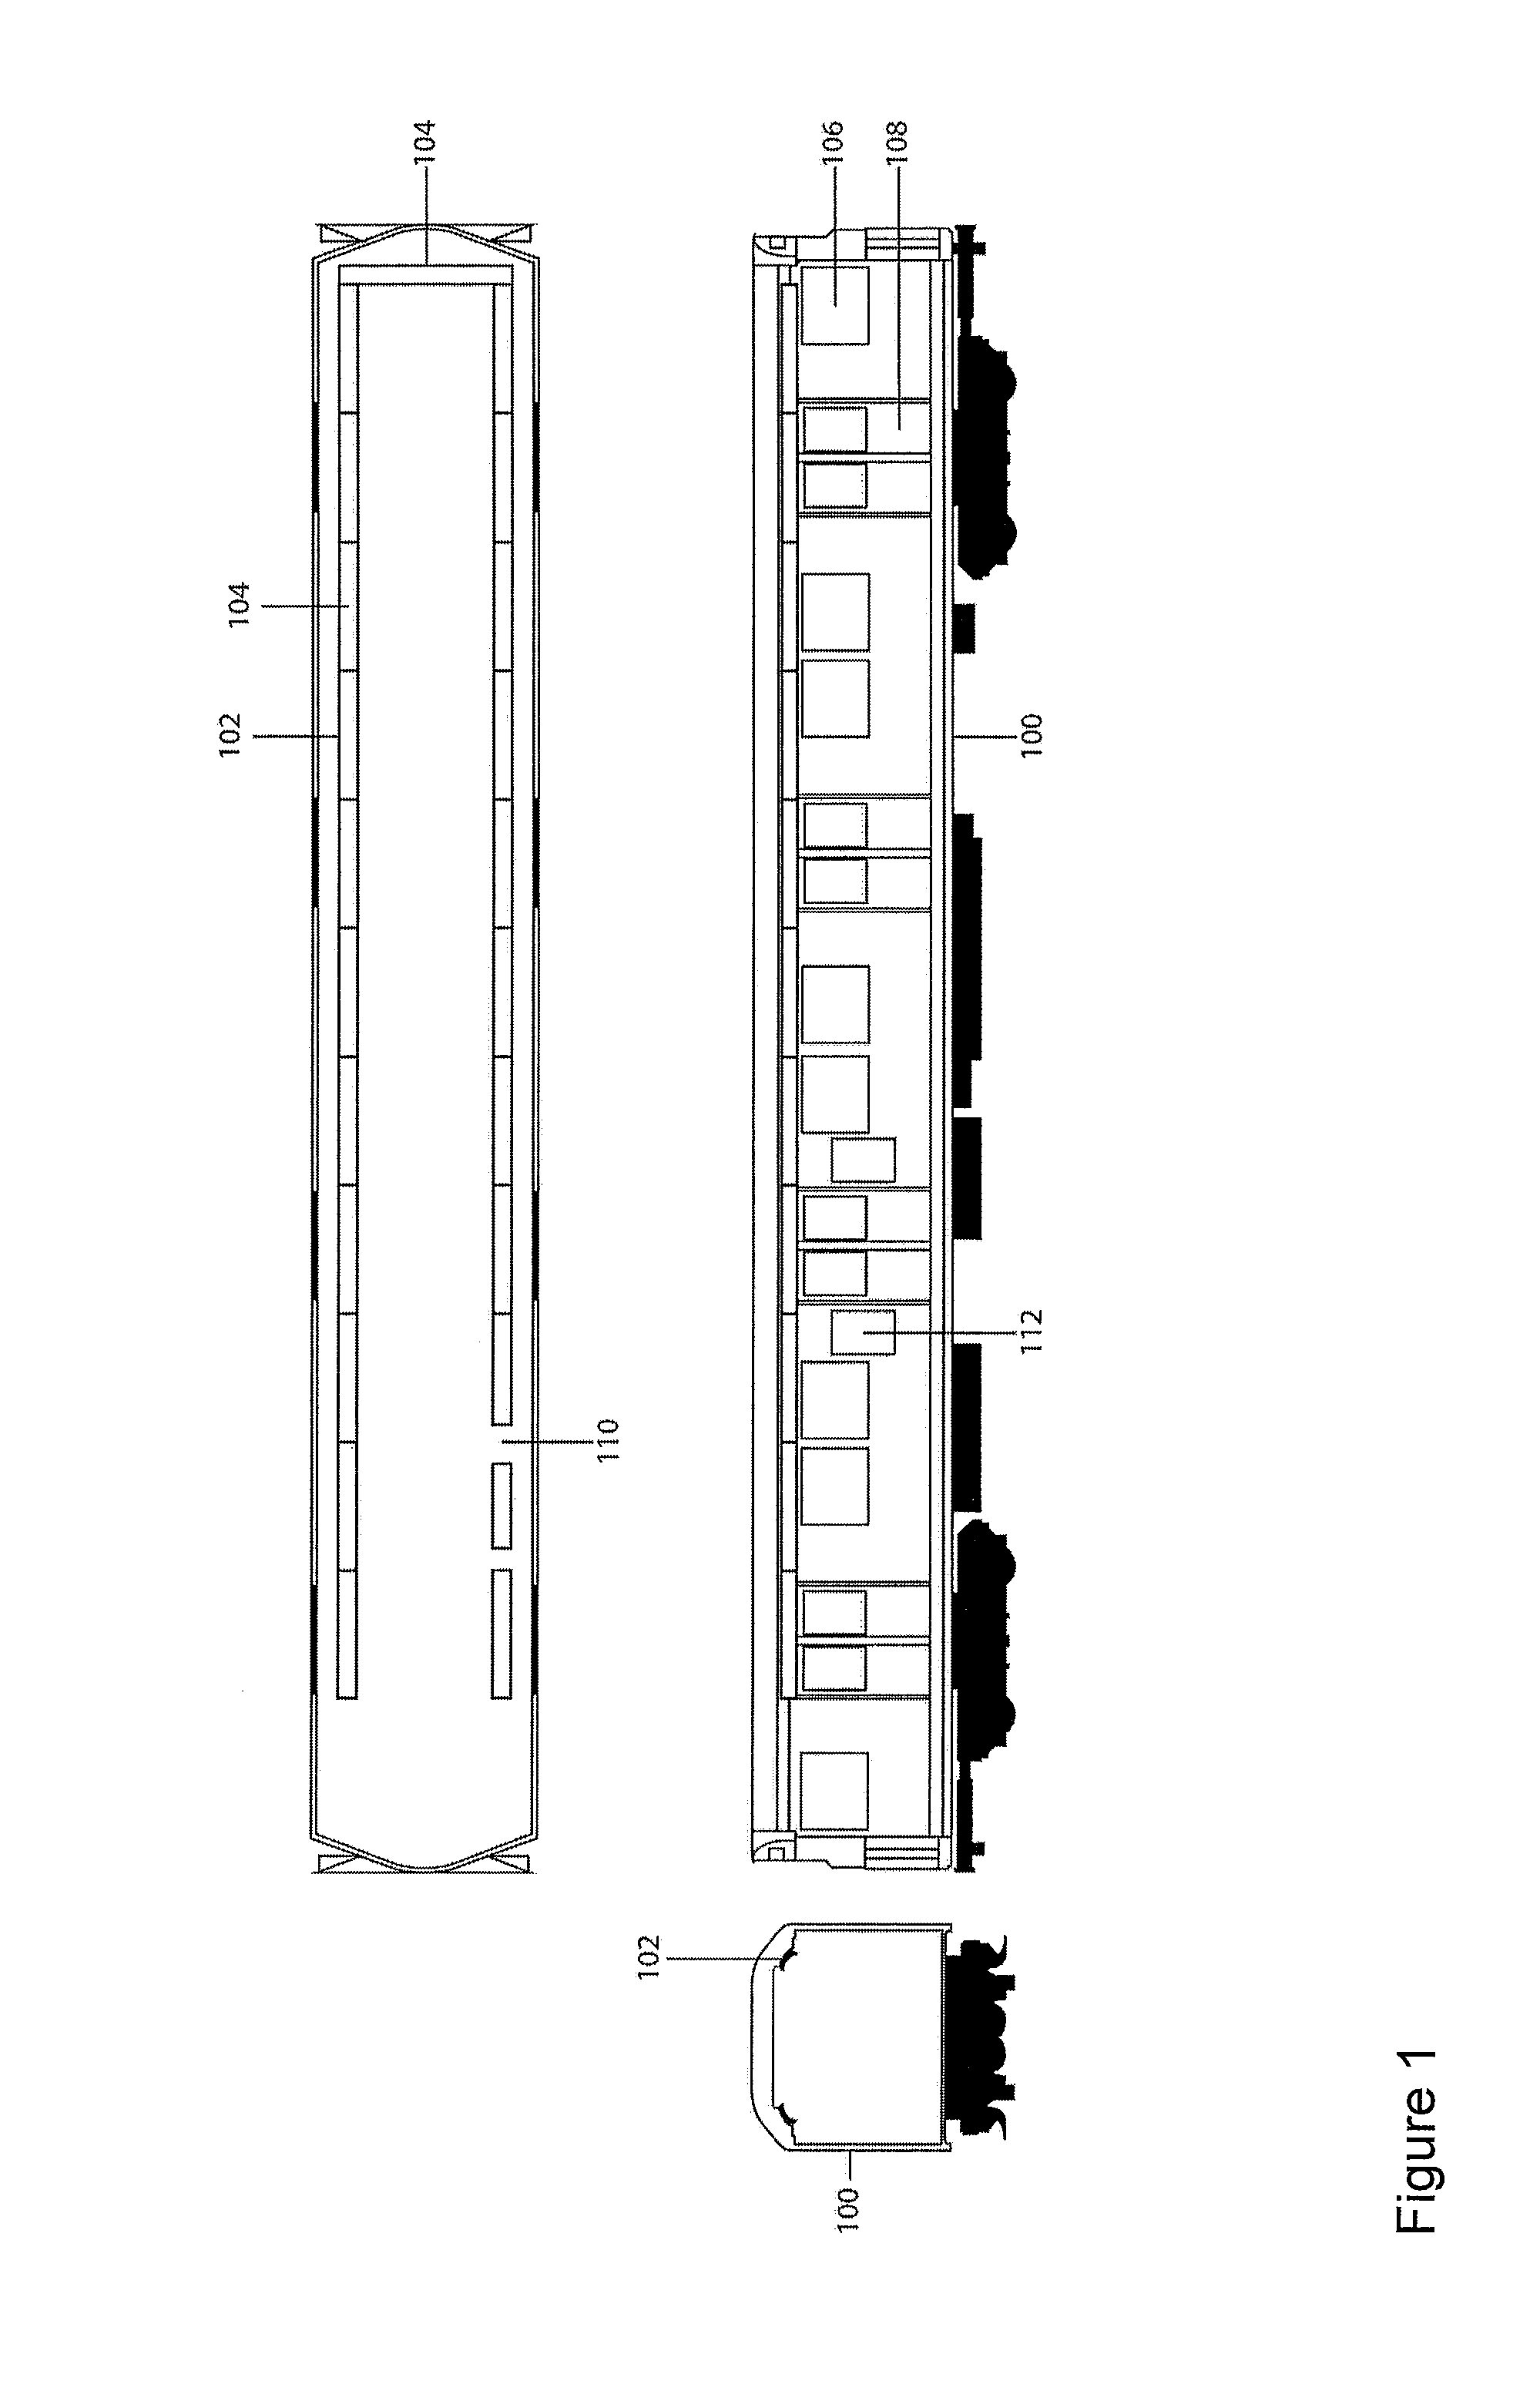 Information Display System for Transit Vehicles